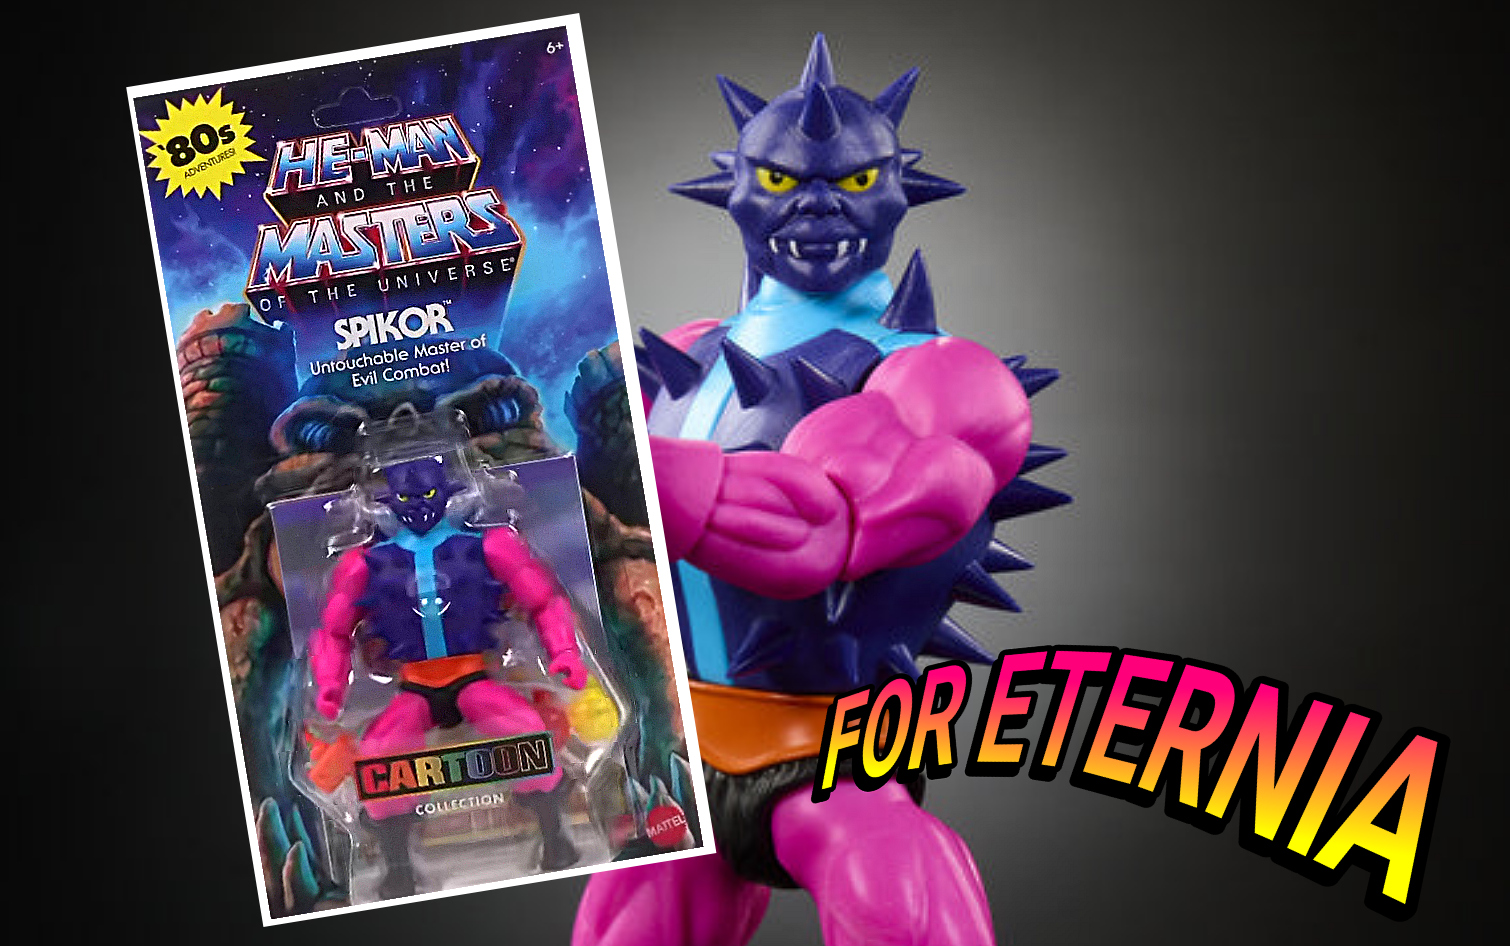 Full Packaging revealed for Masters of the Universe: Origins ”Cartoon Collection” SPIKOR Figure